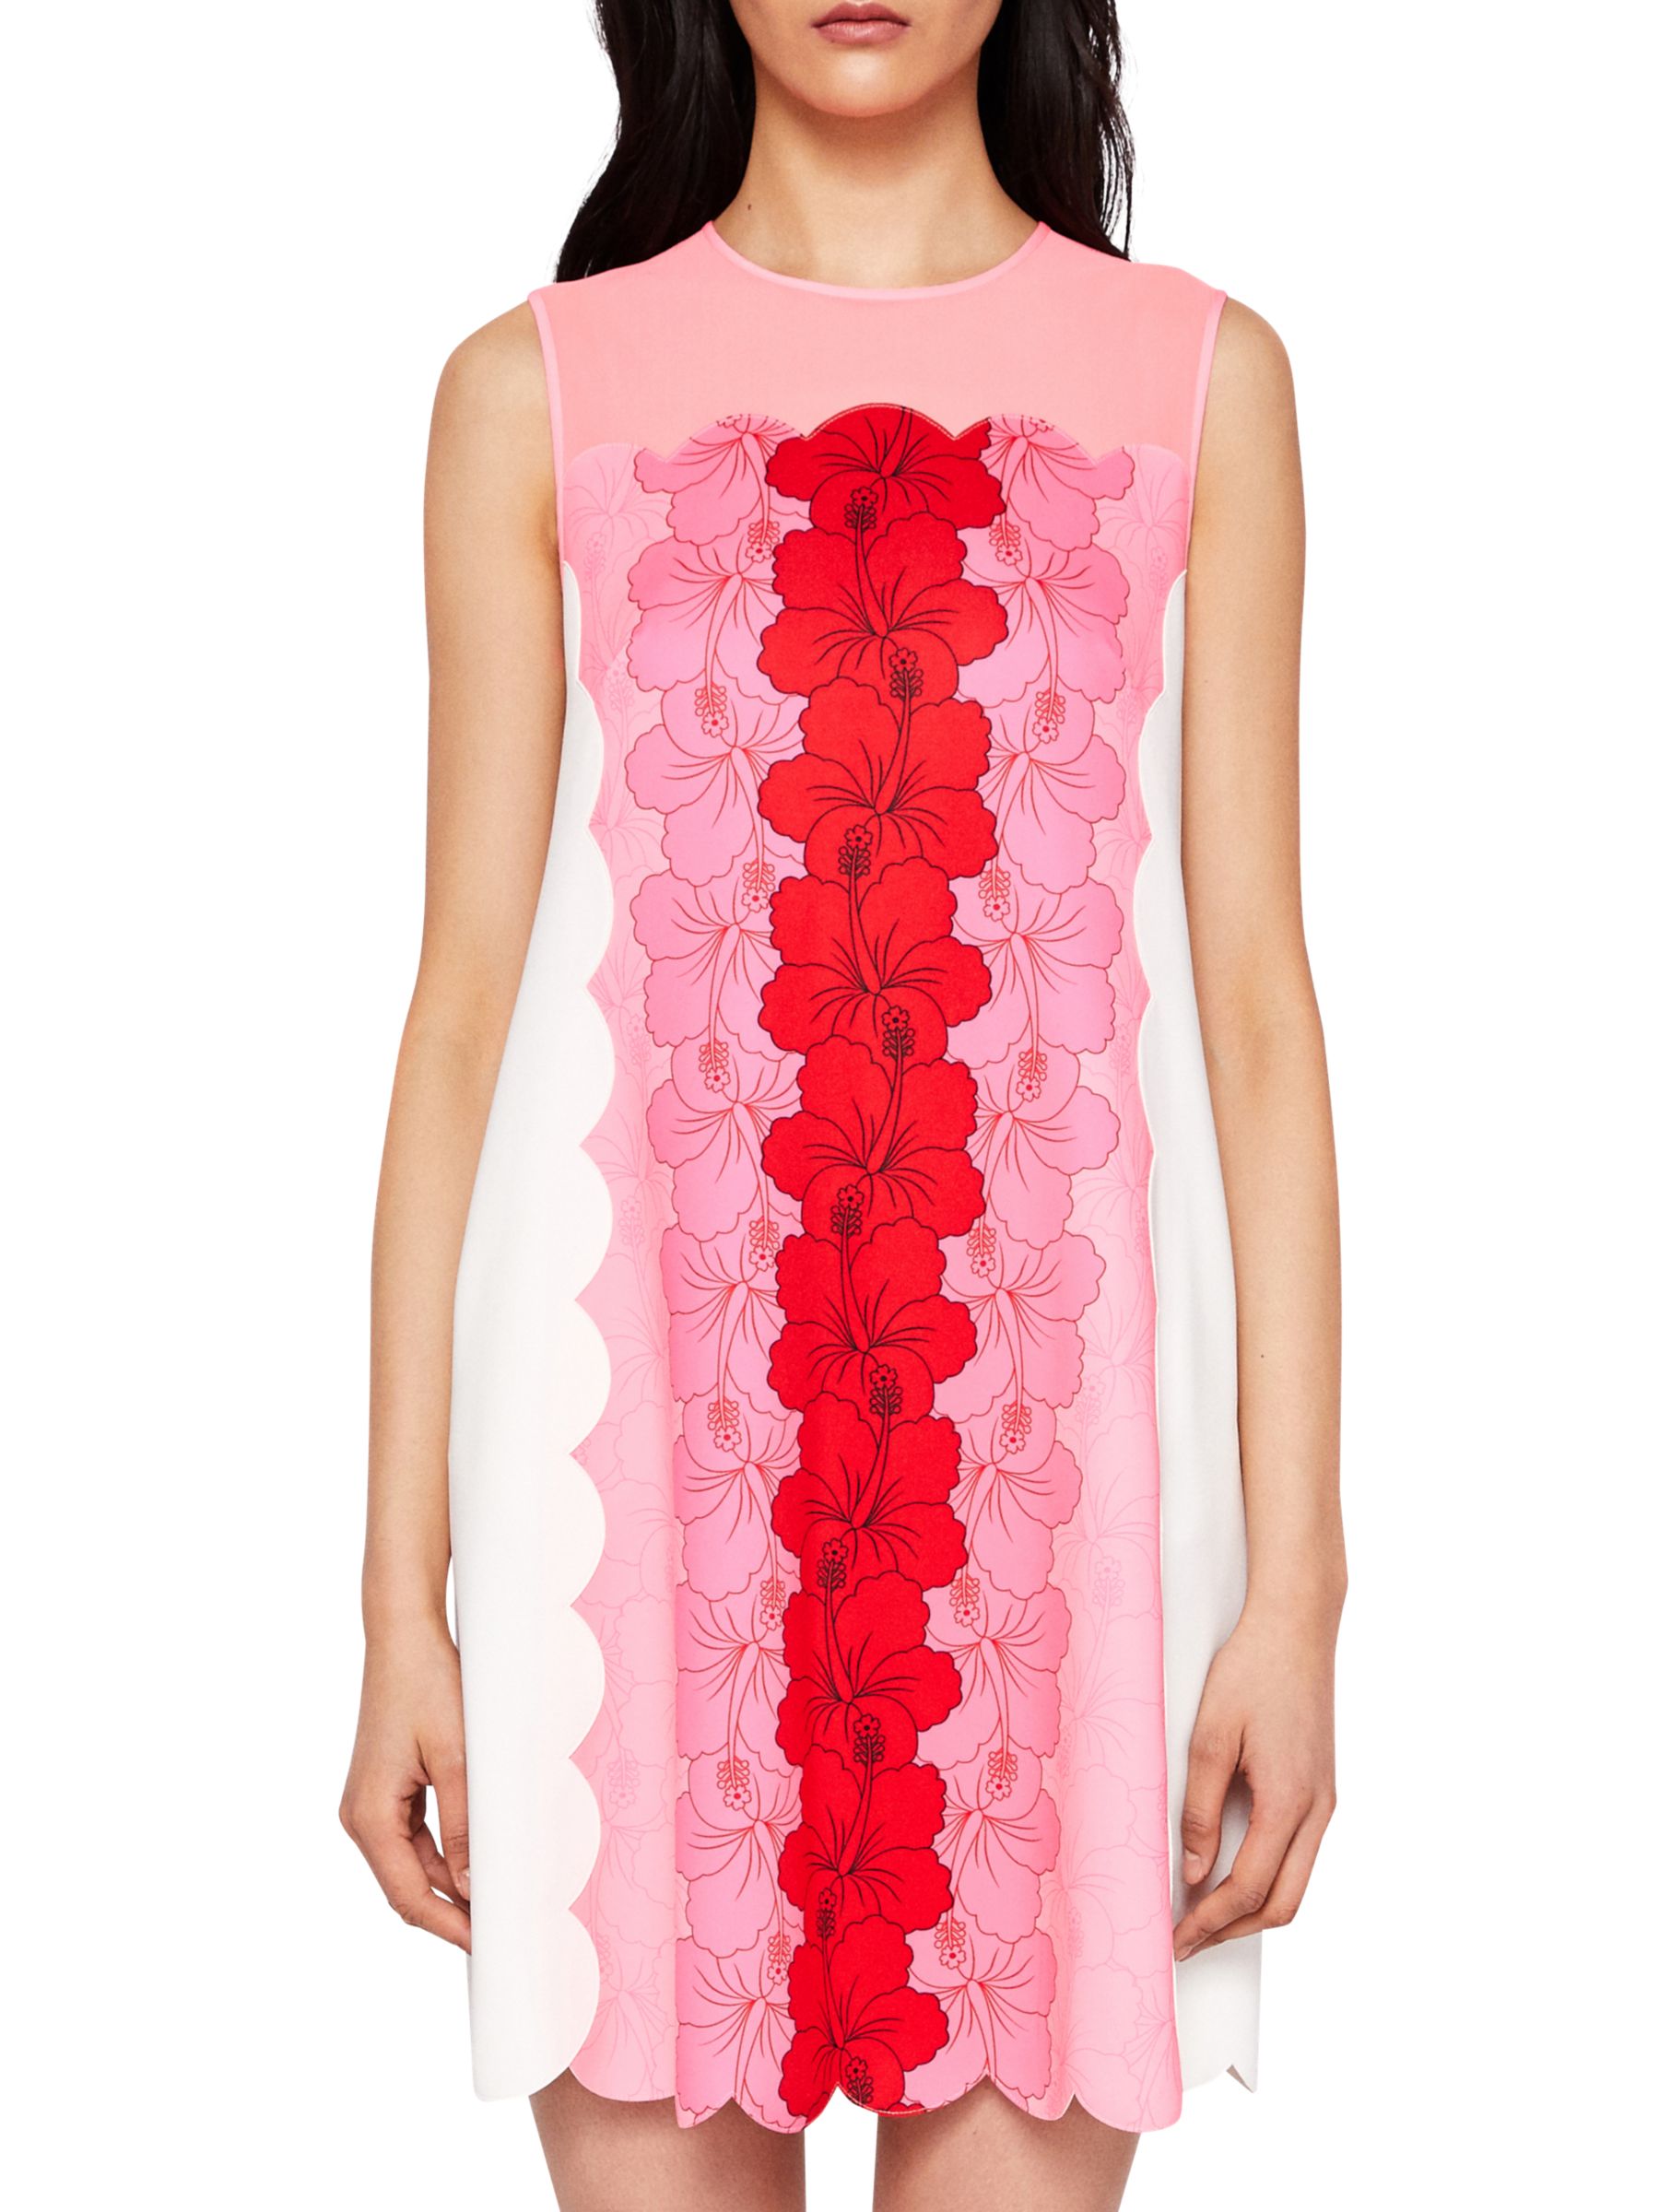 ted baker neon pink dress